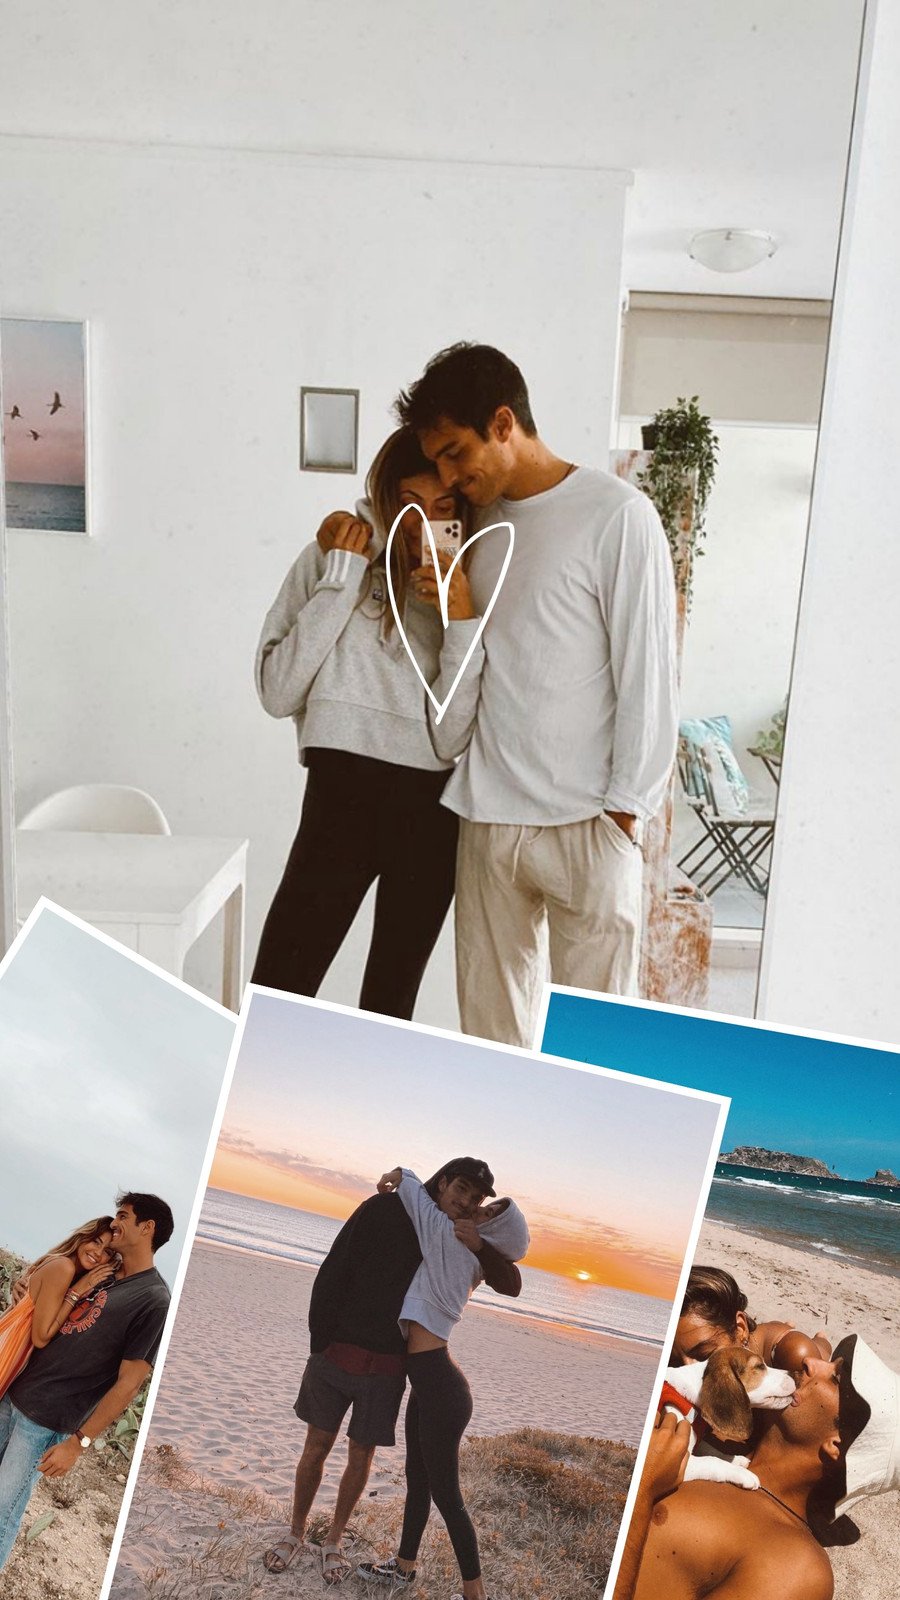 Cute And Romantic Couple In Love Images For Social Media